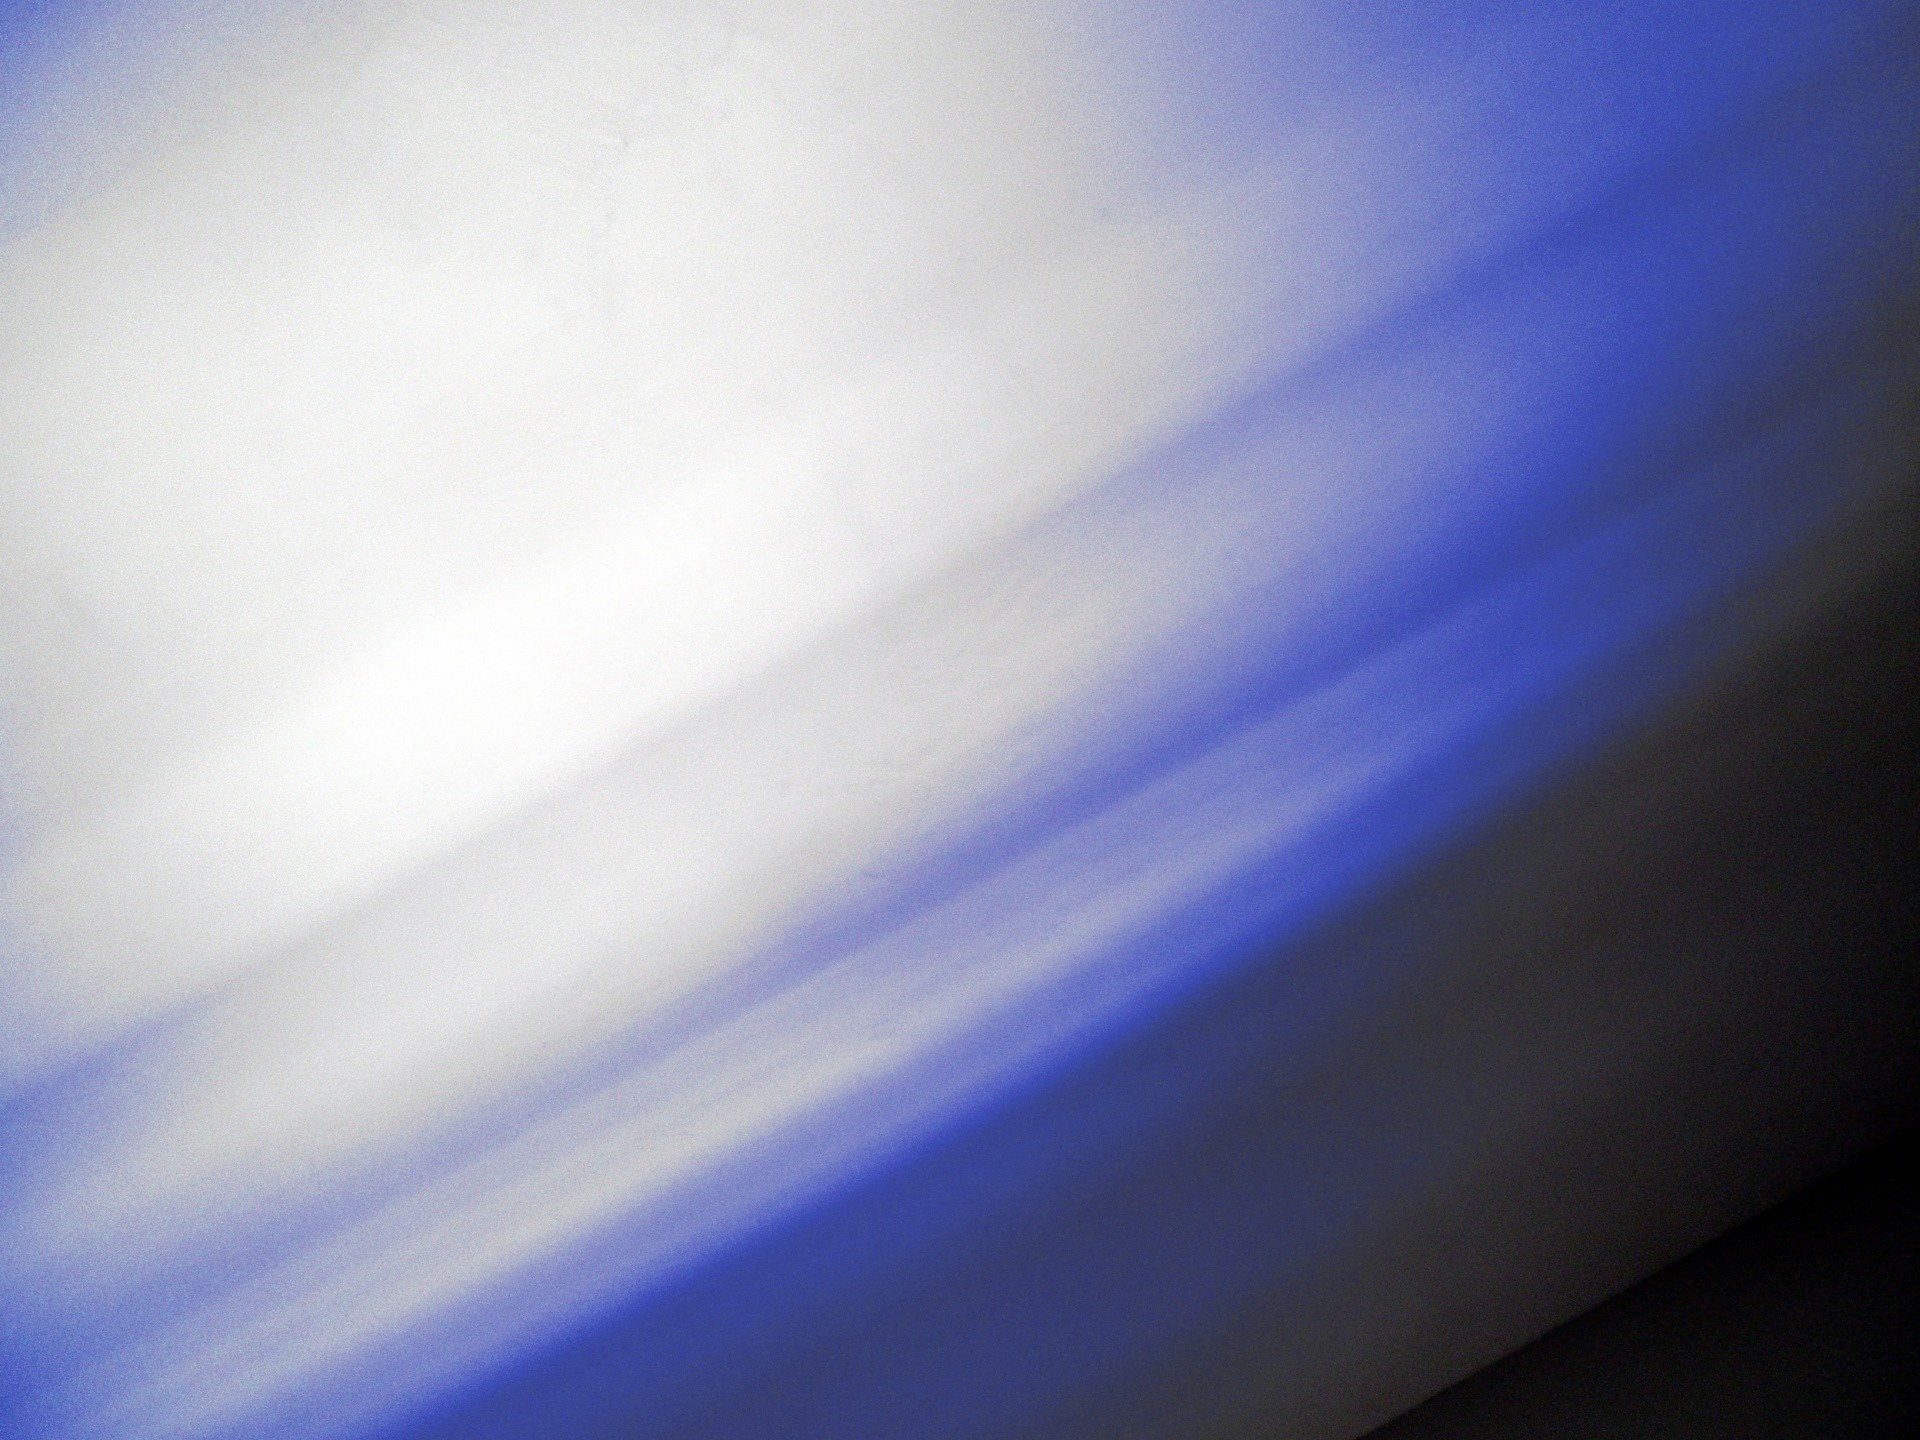 Blue and Black background ·① Download free High Resolution backgrounds